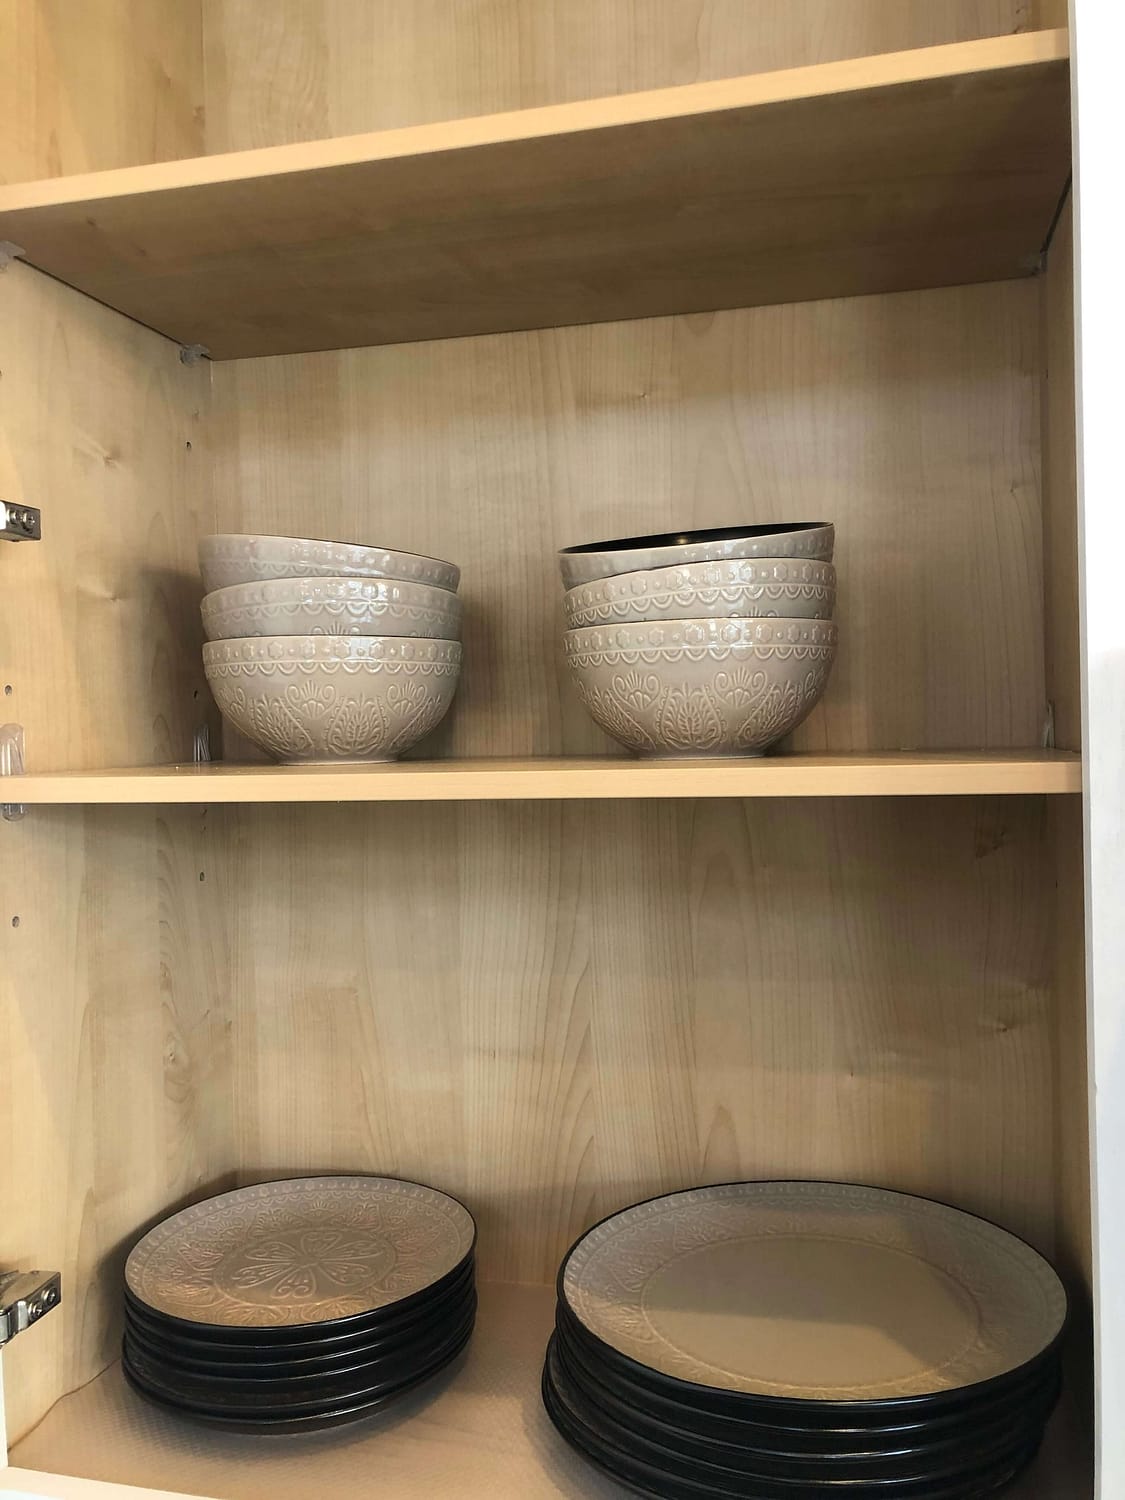 plates and bowls